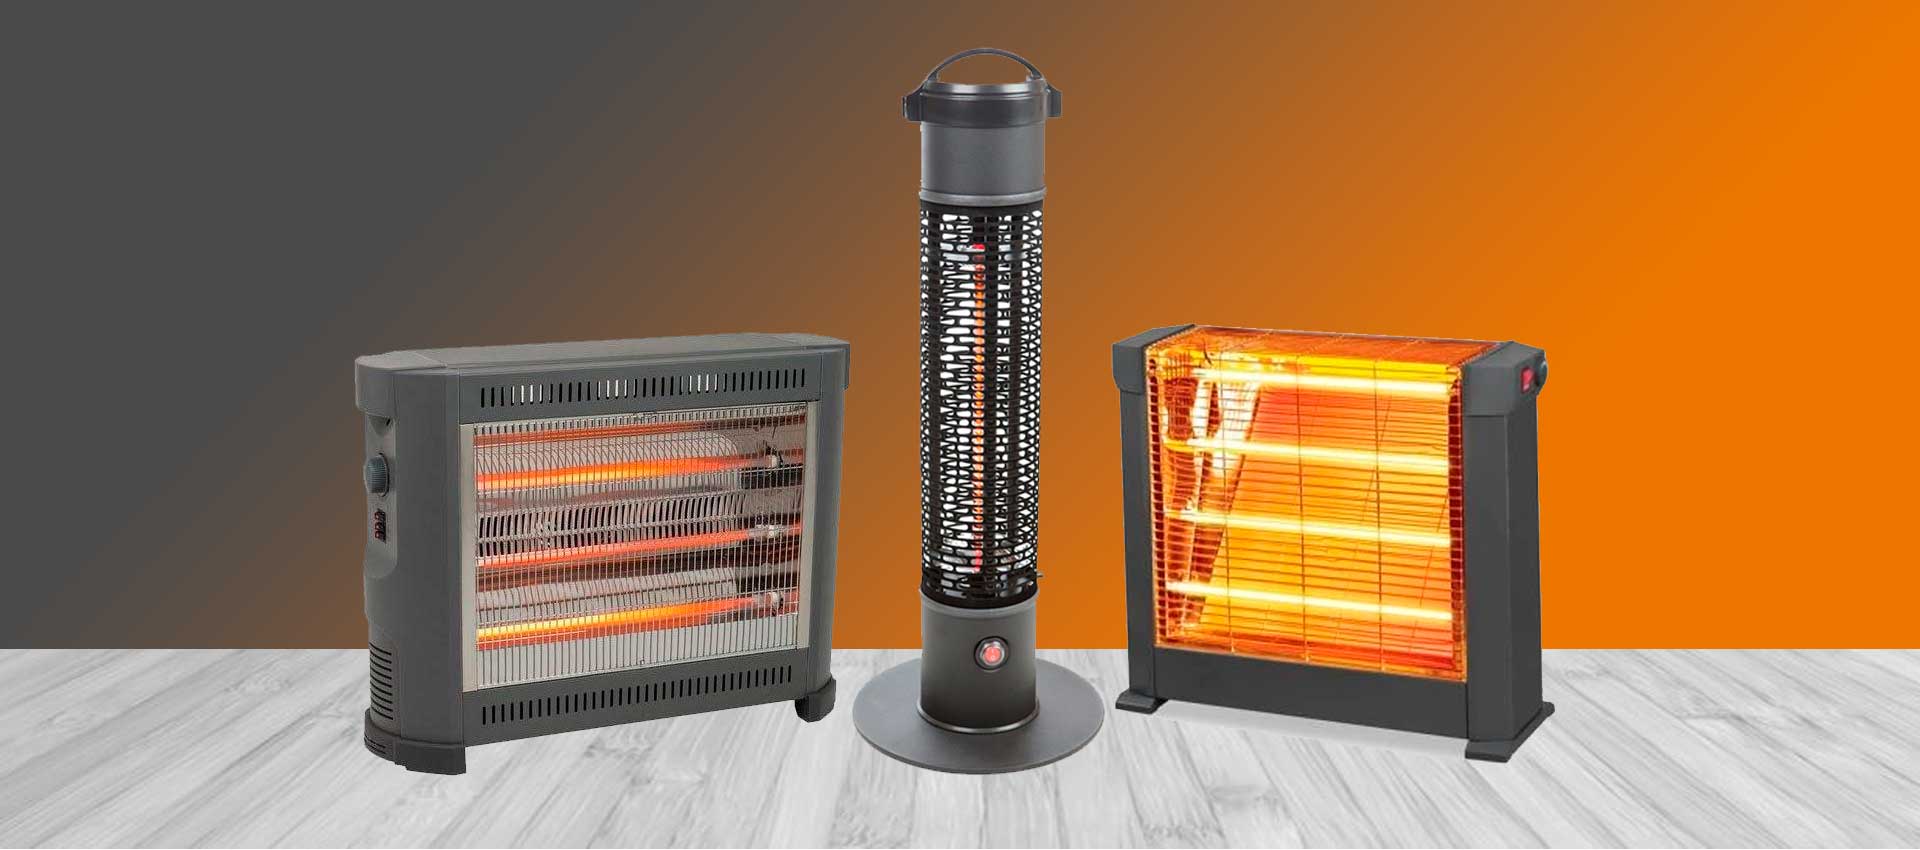 Which One To Choose LPG Heaters Or Electric Heater? - Heaters in Pakistan